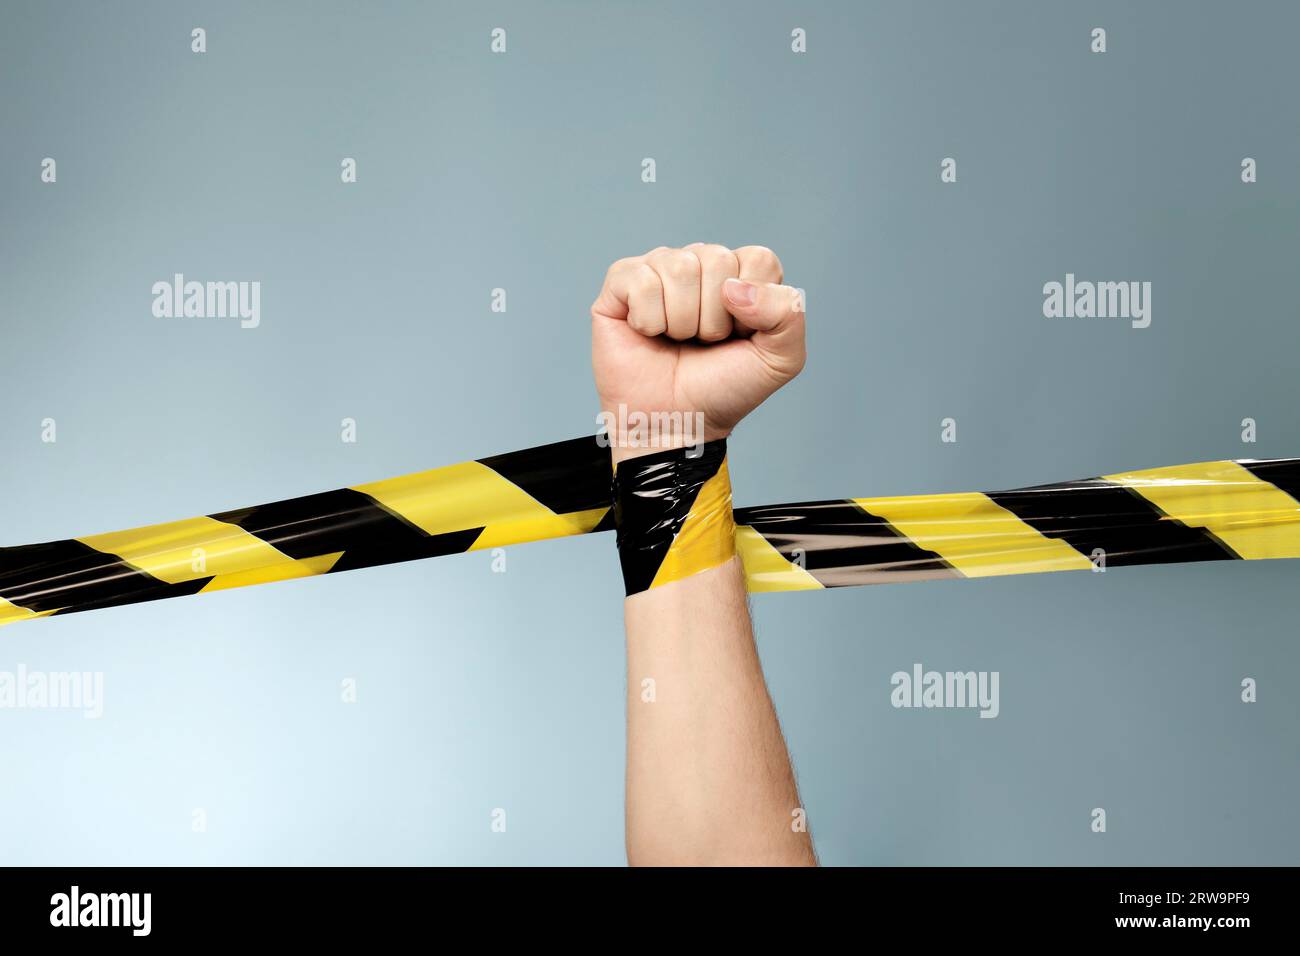 Hand tangled in black and yellow barrier tape Stock Photo